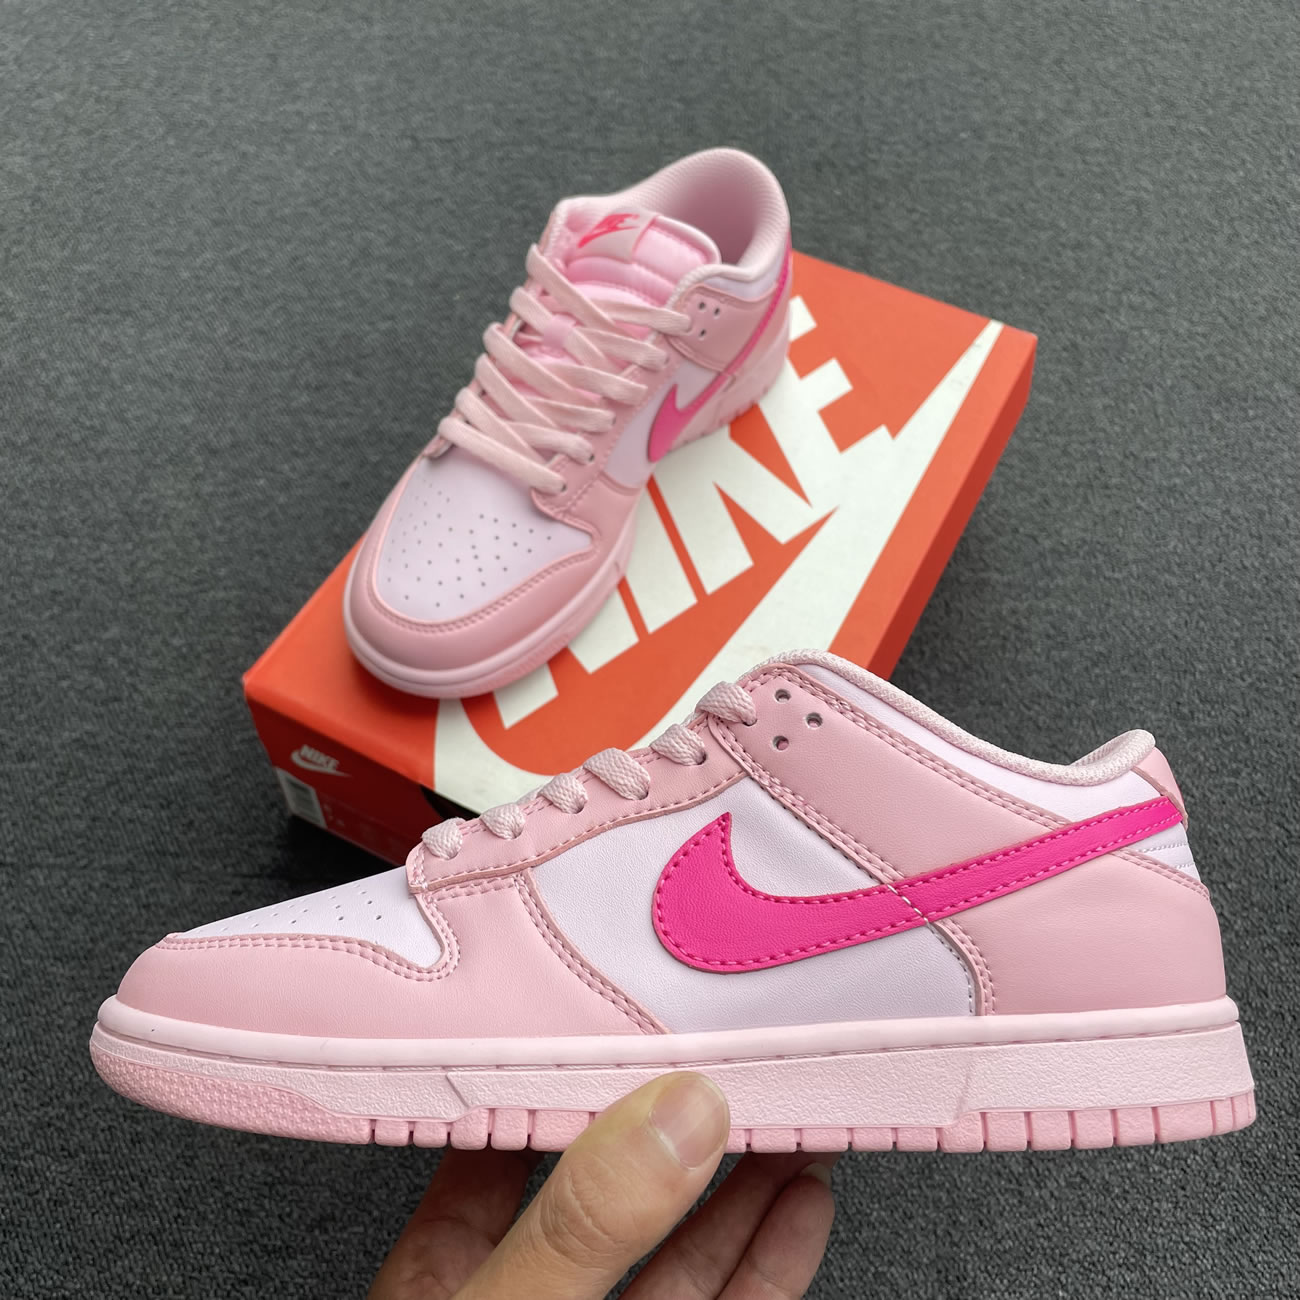 Nike Dunk Low Triple Pink Gs Dh9765 600 (3) - newkick.org